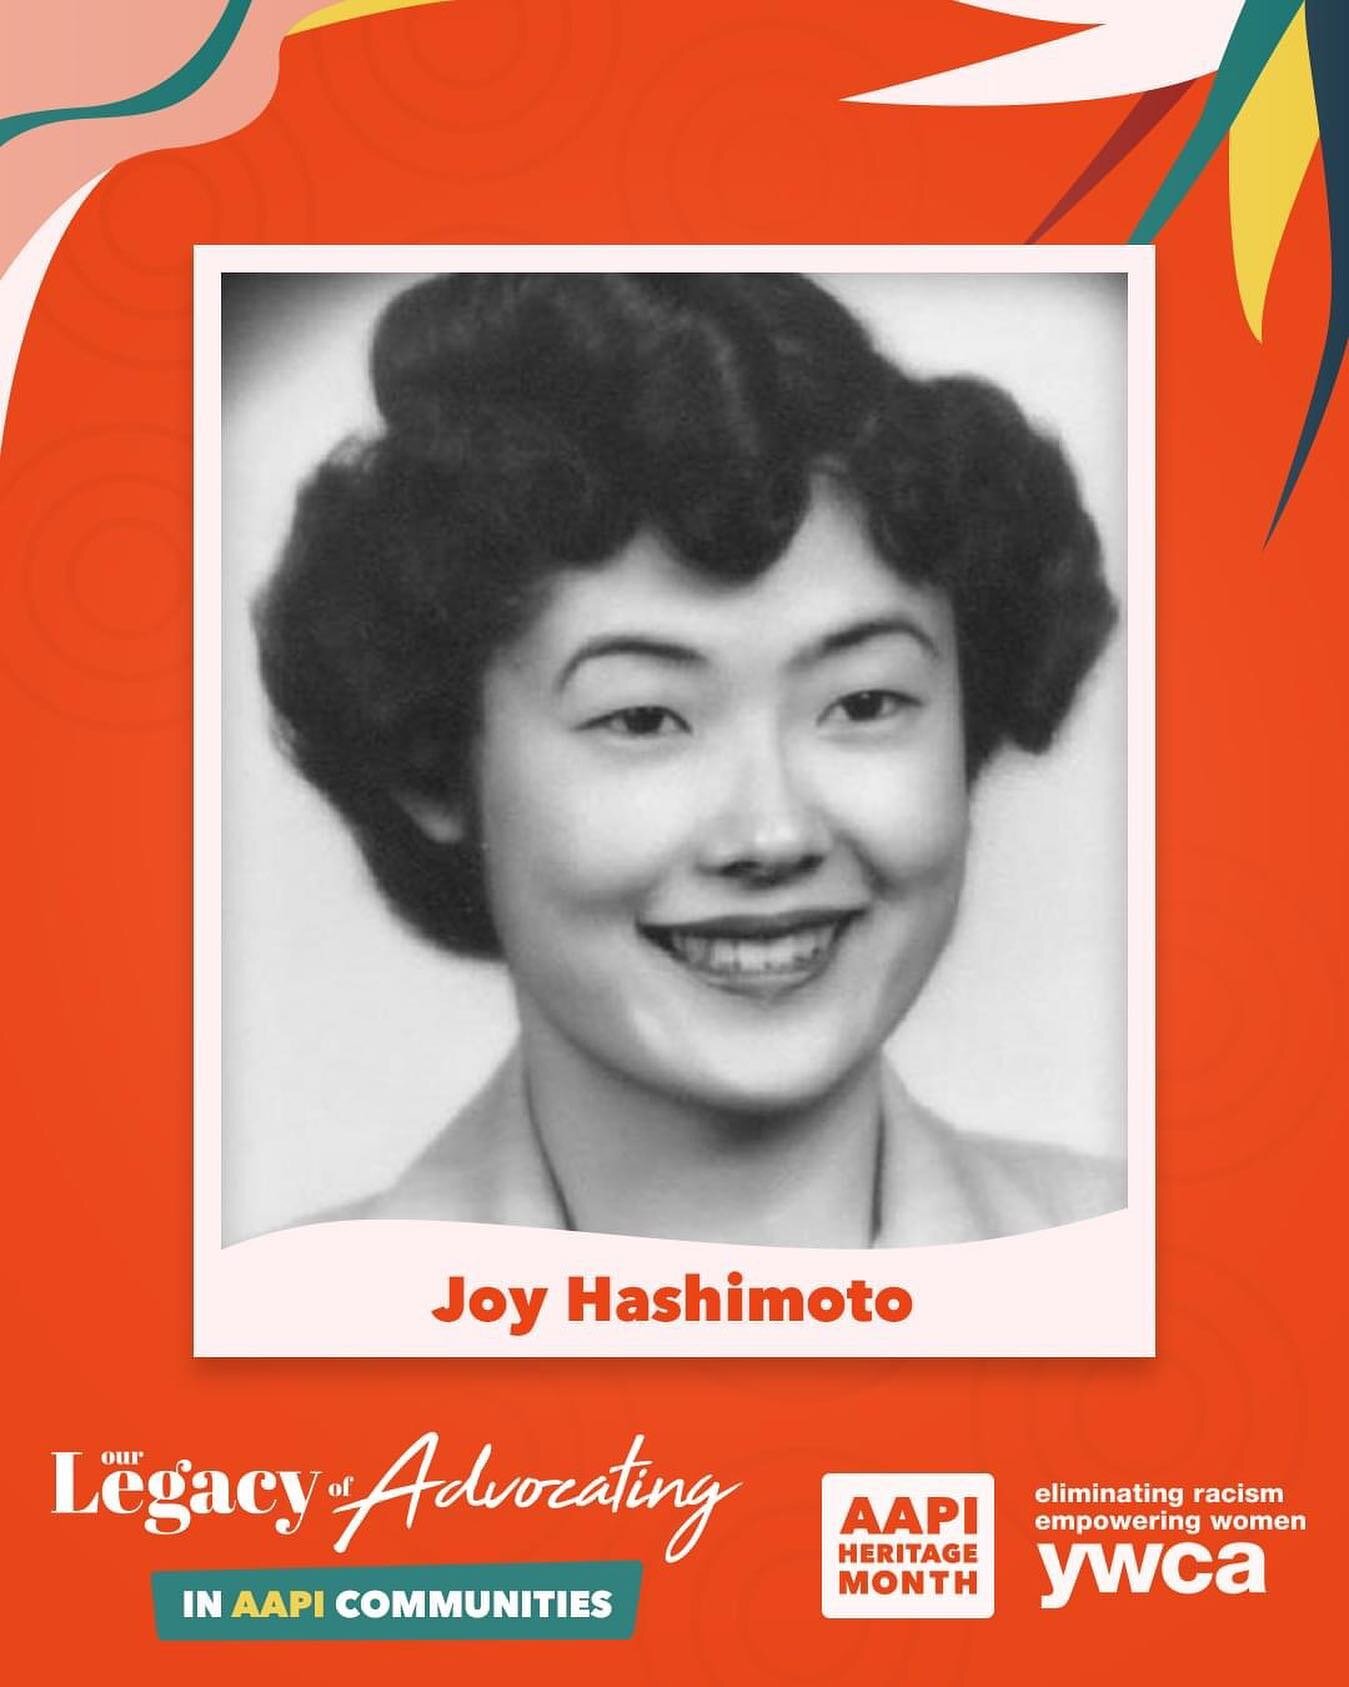 After she and her family were sent to a Japanese internment camp during WWII, Joy Hashimoto became active in the YWCA movement after her mother helped establish YWCAs in the camps. Learn more 👉 link in bio #YWCALeader #AAPIHeritageMonth2023 #AAPIHM2